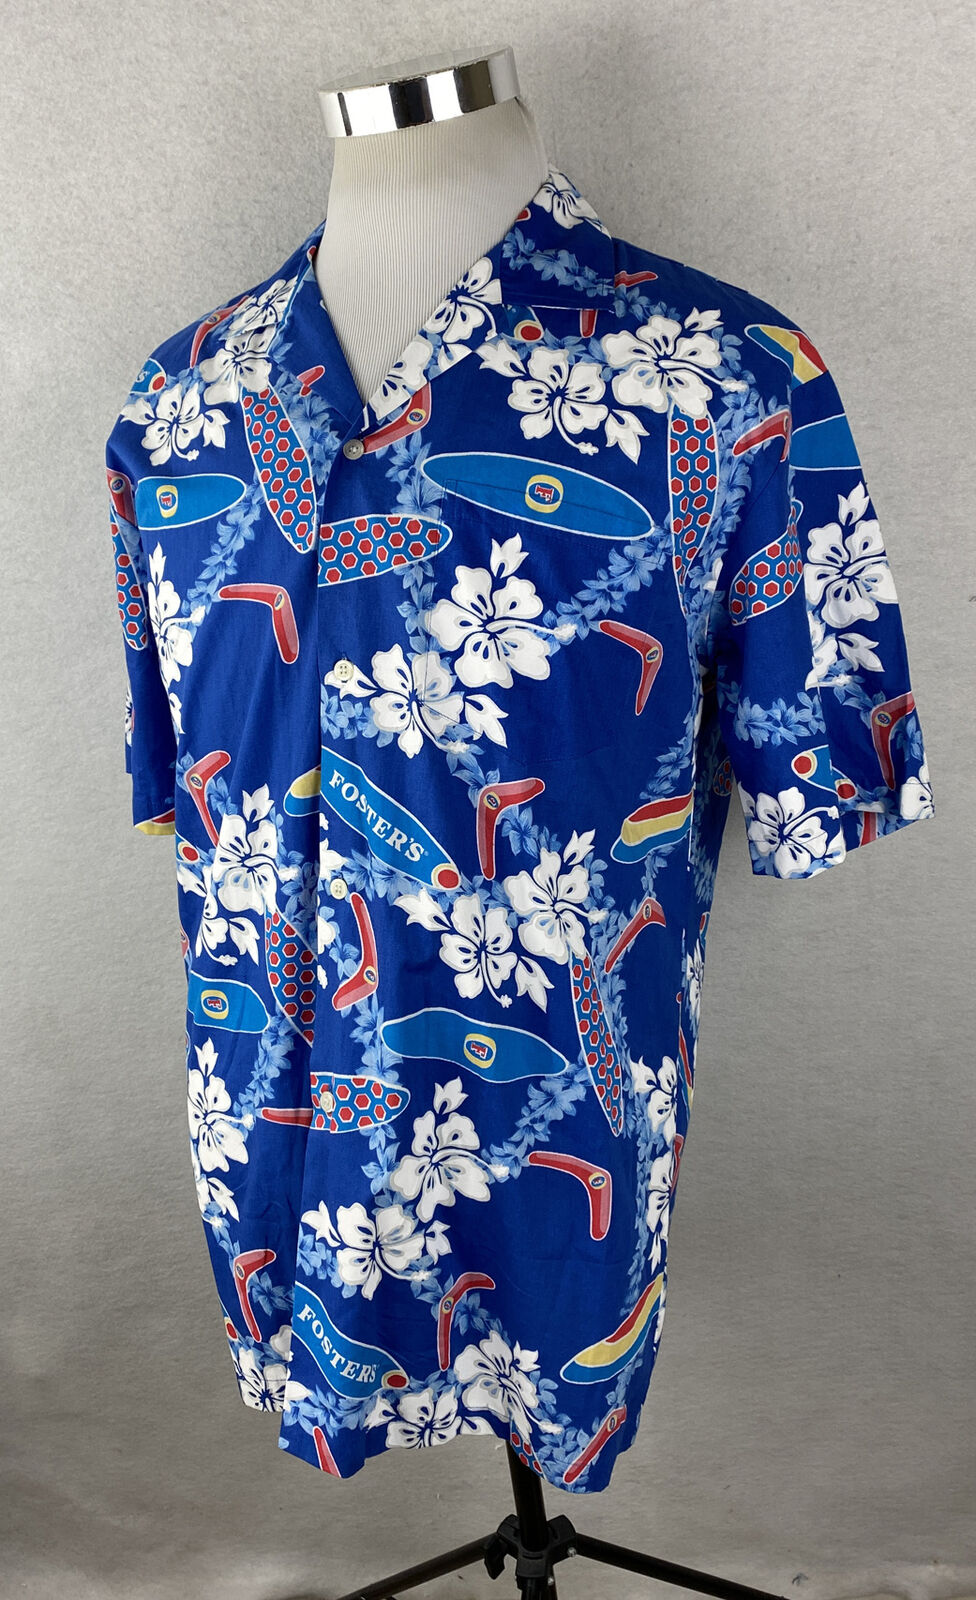 Fosters lager Hawaiian Shirt, Beach shorts - Picture 2